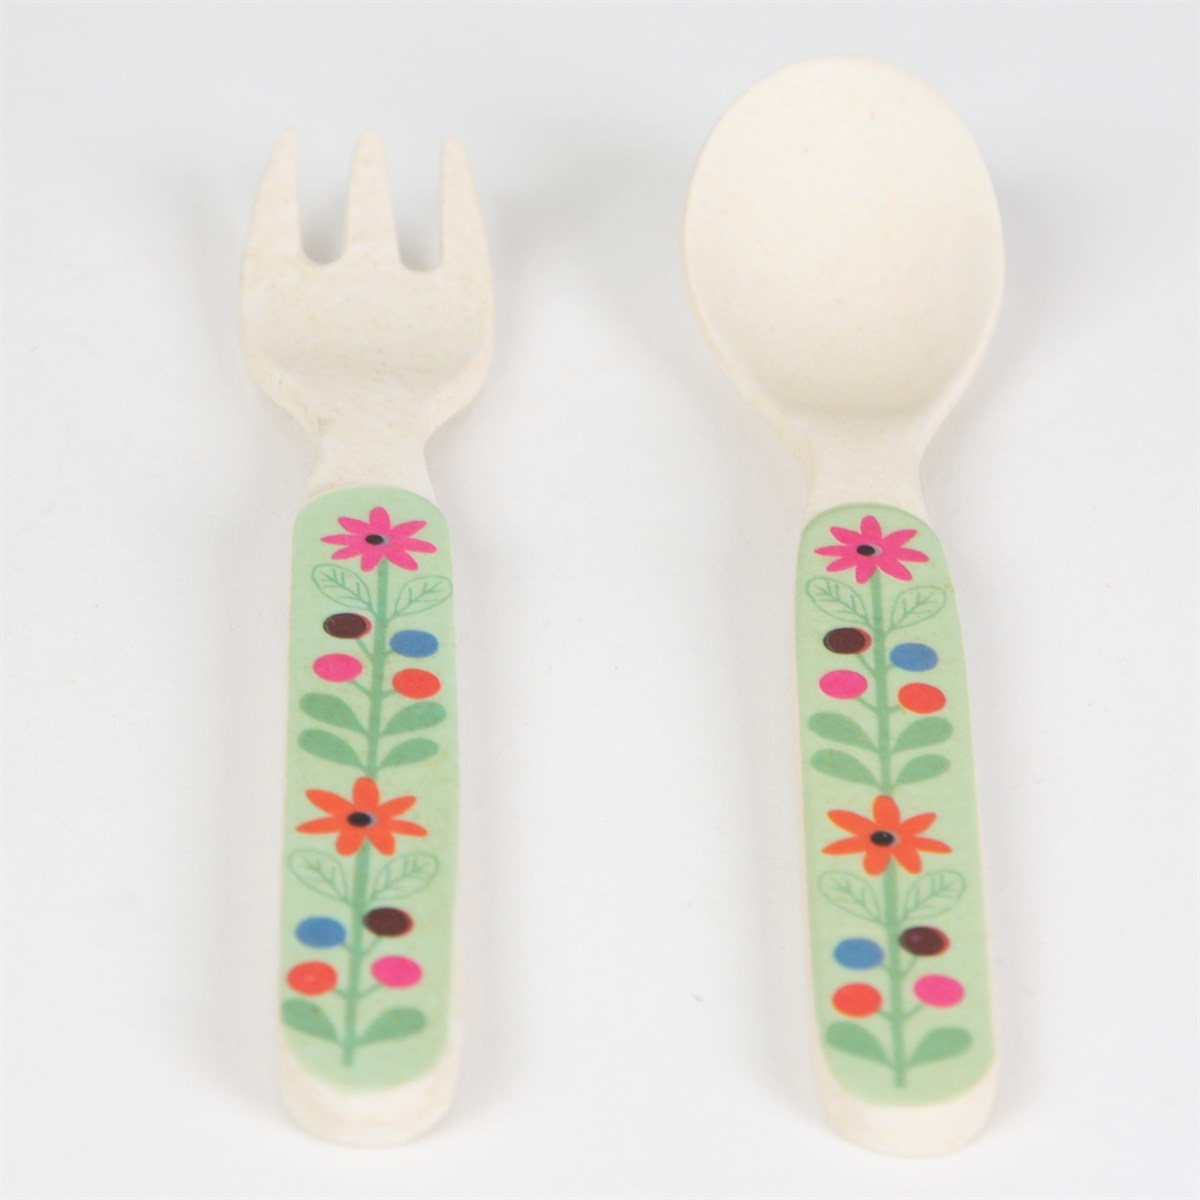 Gorgeous bamboo cutlery set (fork and spoon) featuring a fun floral design.